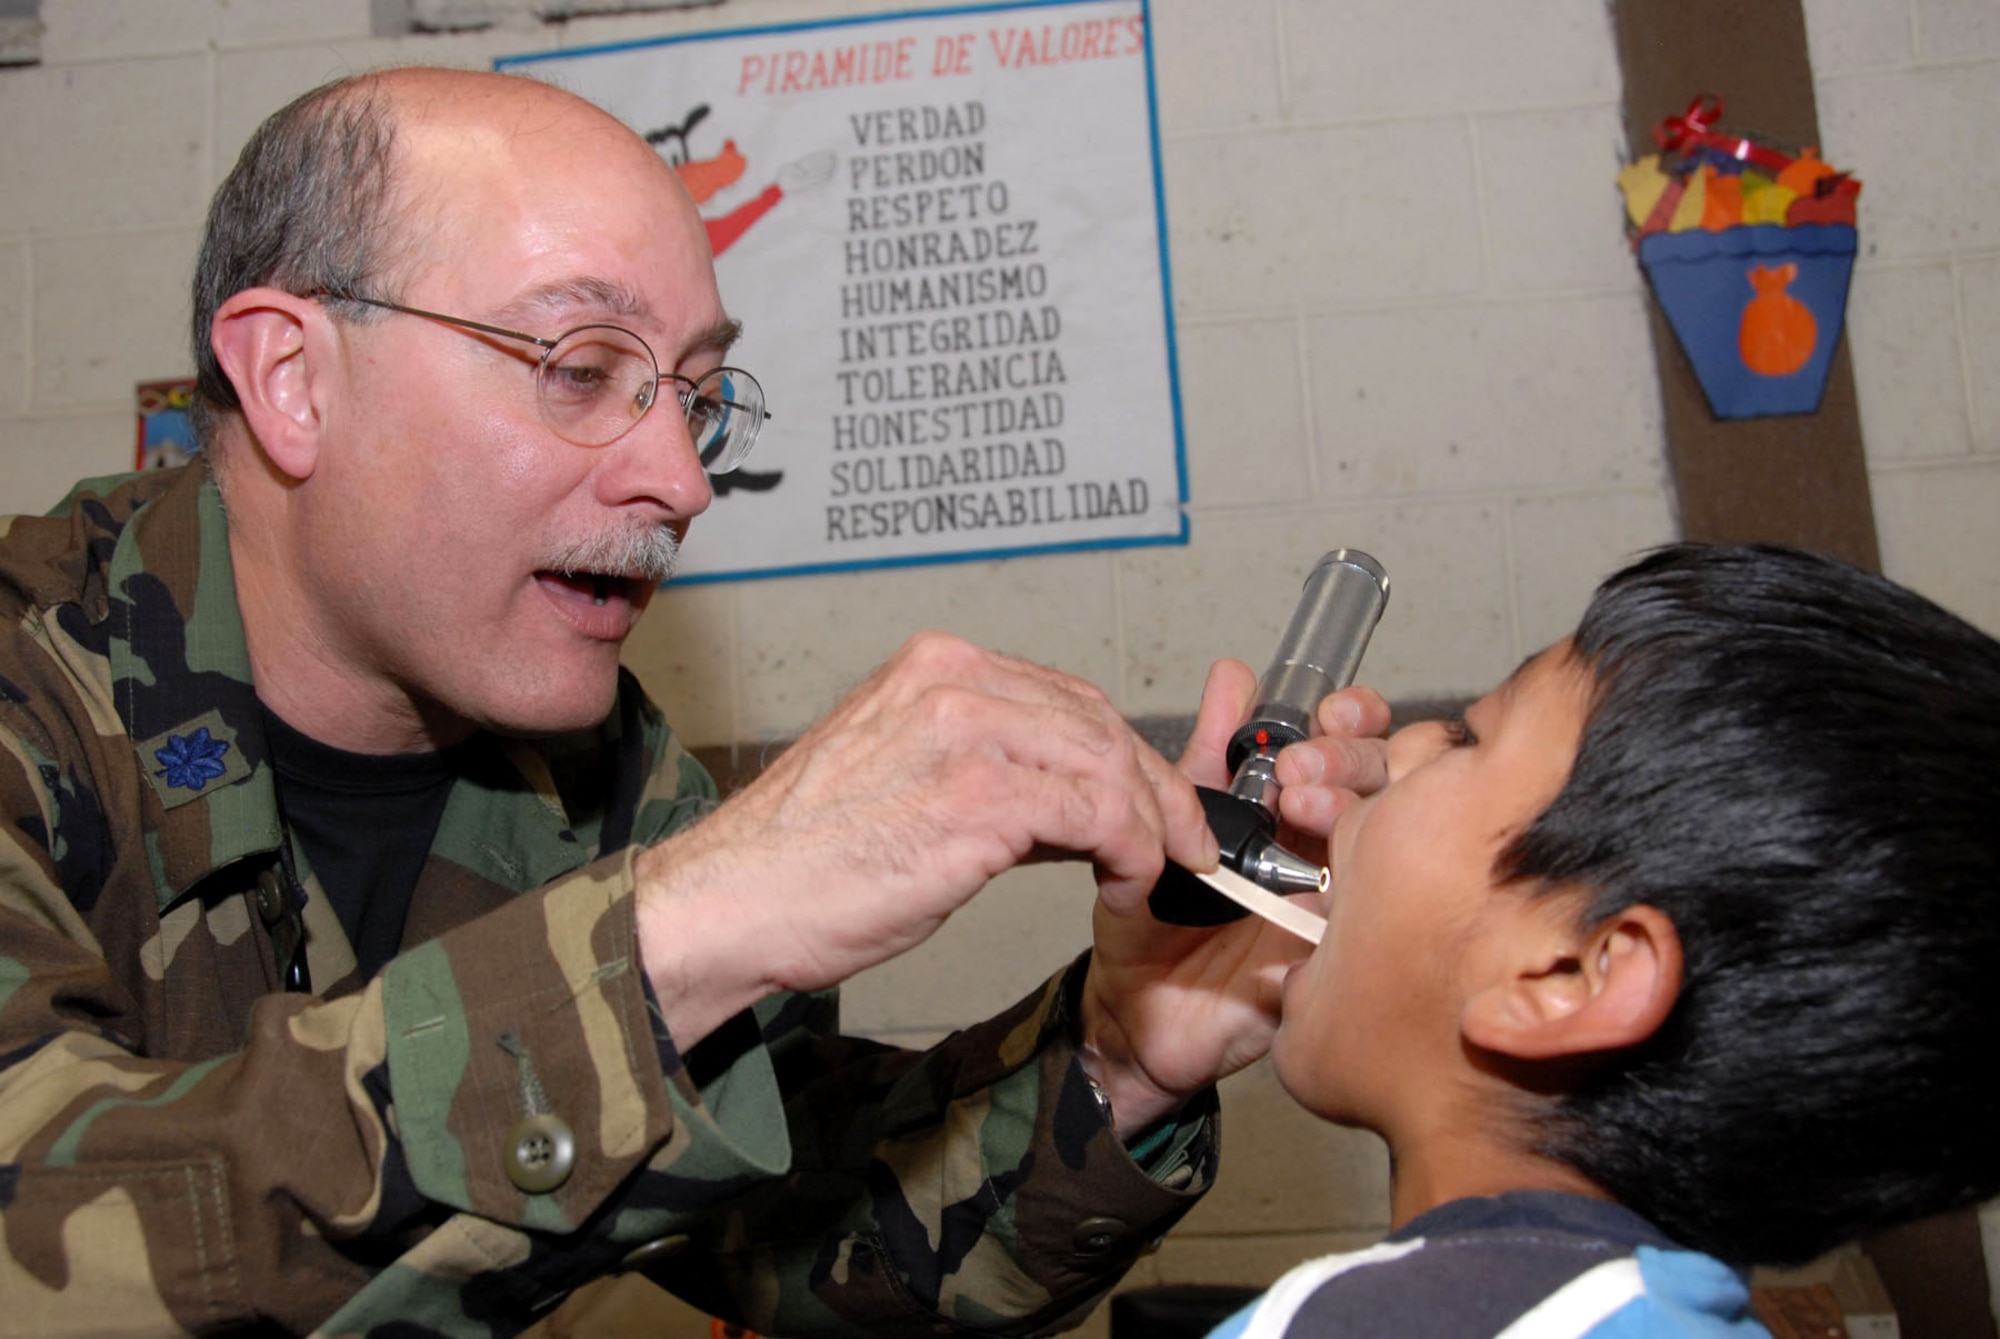 Lt. Col. (Dr.) Roberto Caro performs a medical examination on a young Guatemalan boy during the New Horizons Medical Readiness Training Exercise conducted April 14 through 28 in the region of San Marcos, Guatemala. General medicine treated more than 5,800 patients during the two-week mission. Colonel Caro is a flight surgeon with the 445th Aerospace Medicine Squadron, Wright Patterson Air Force Base, Ohio. (U.S. Air Force photo/Master Sgt.Chance C. Babin)
